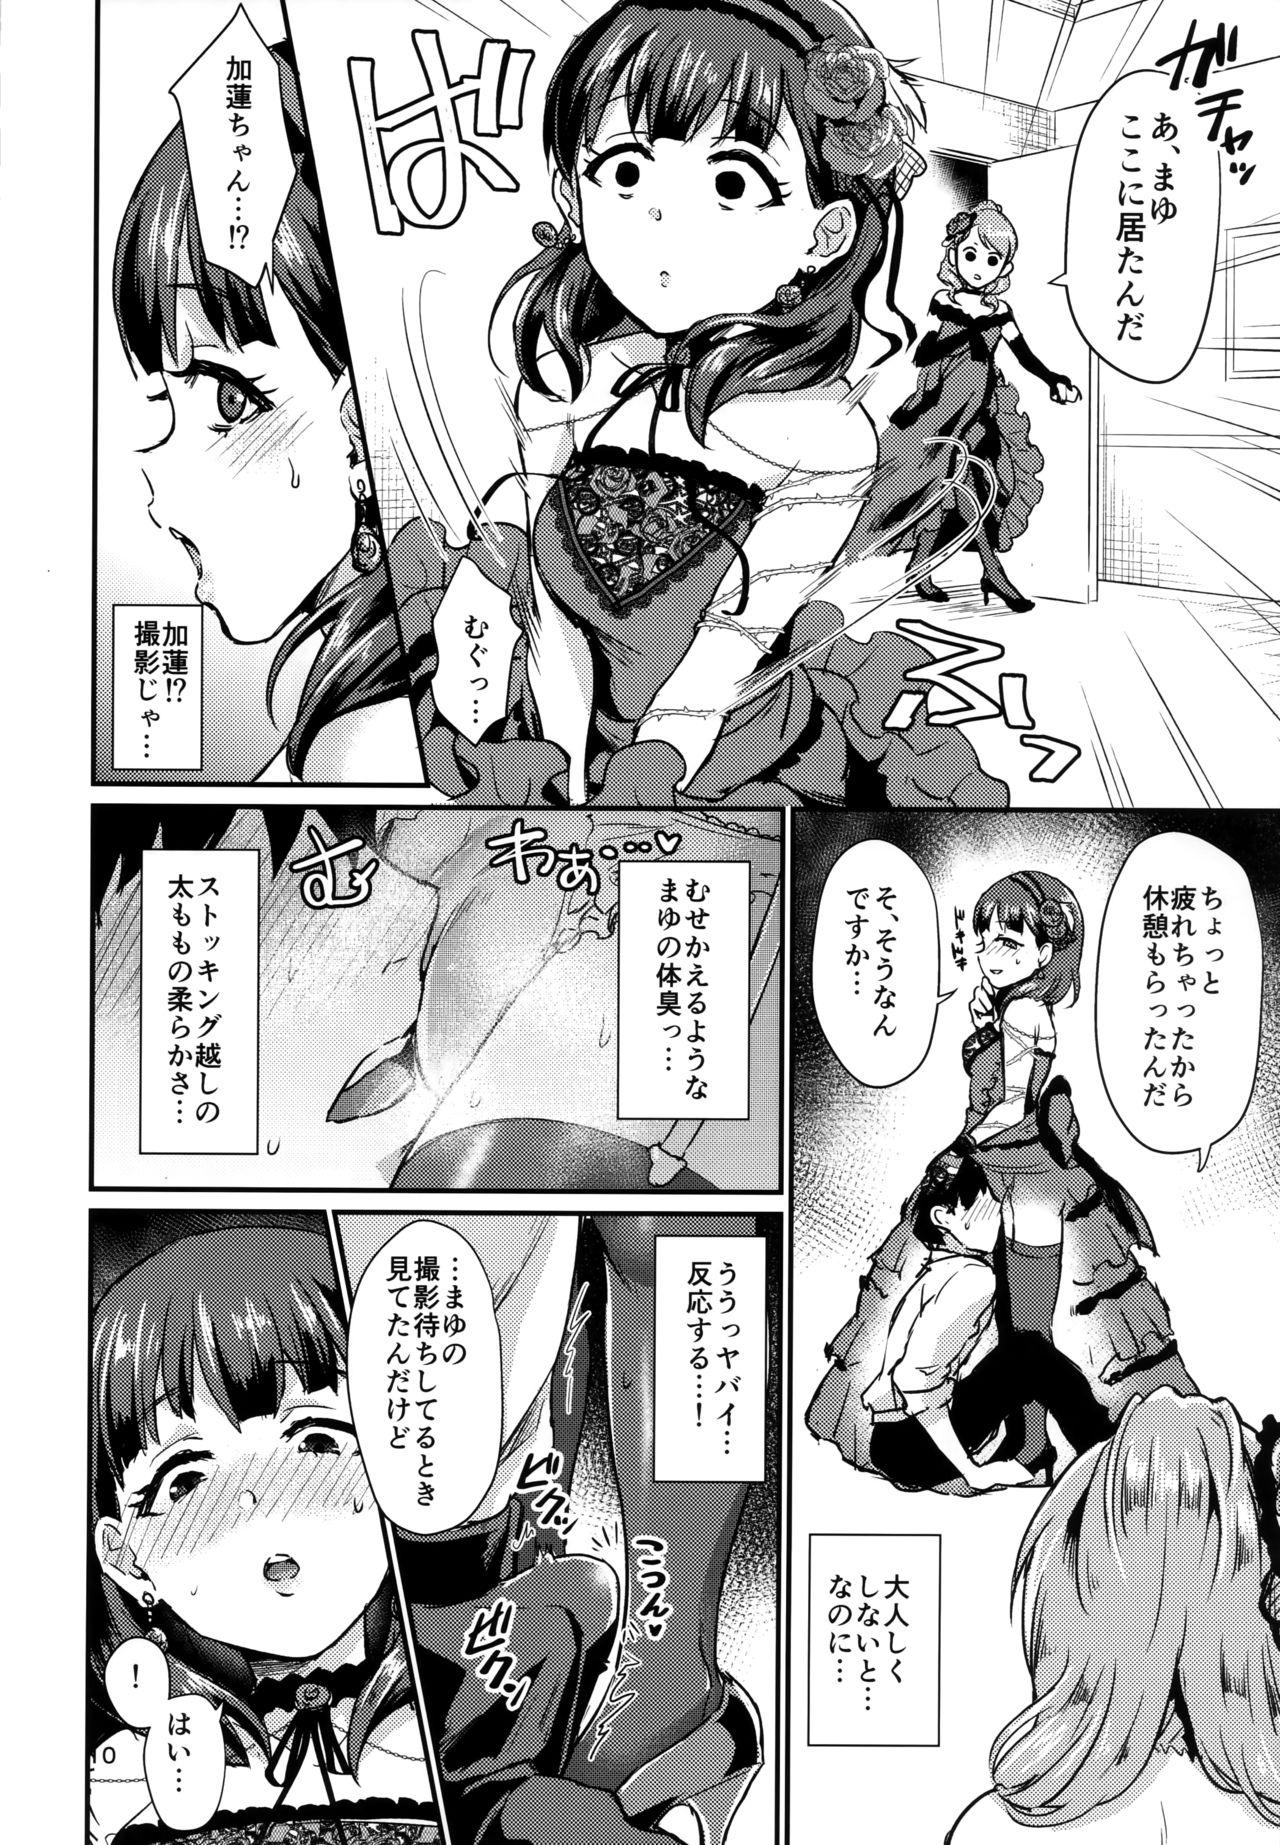 Penetration Don't stop my pure love - The idolmaster Indoor - Page 9